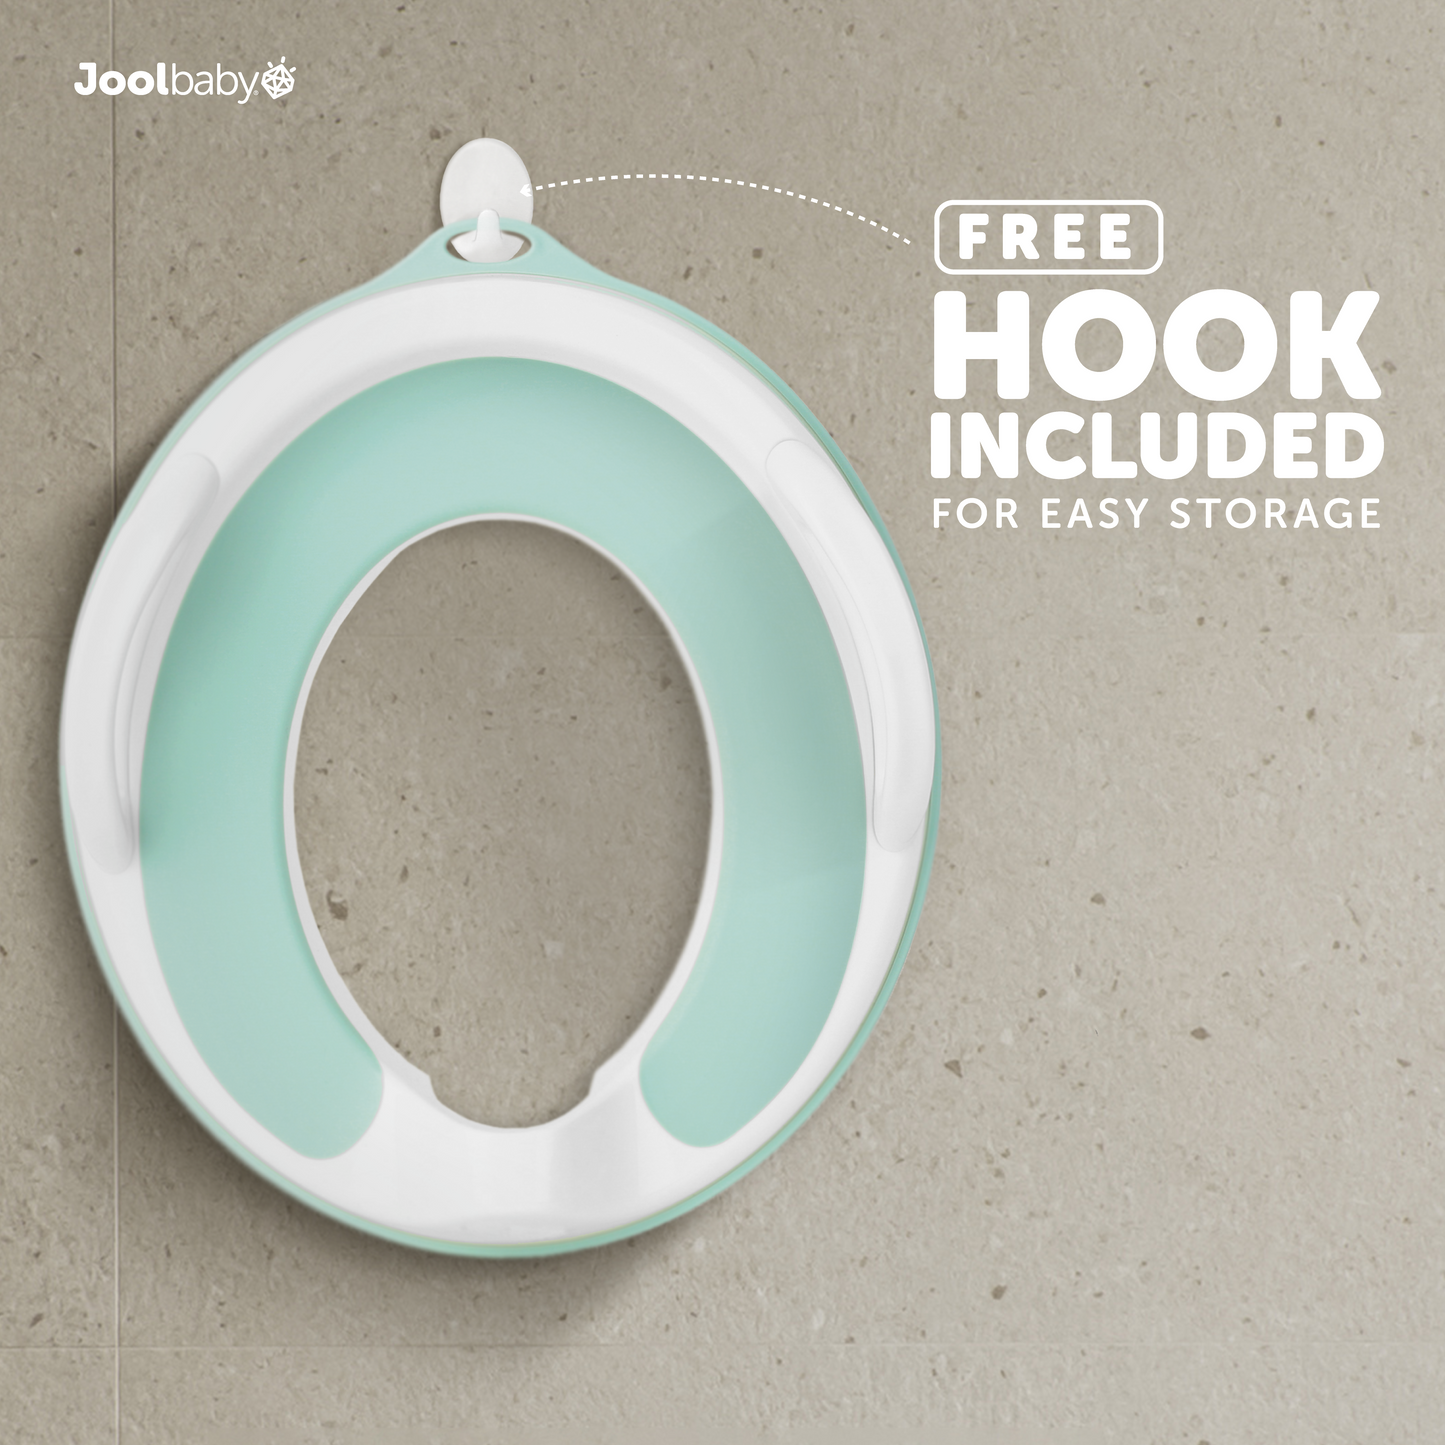 Potty Training Seat with Handles